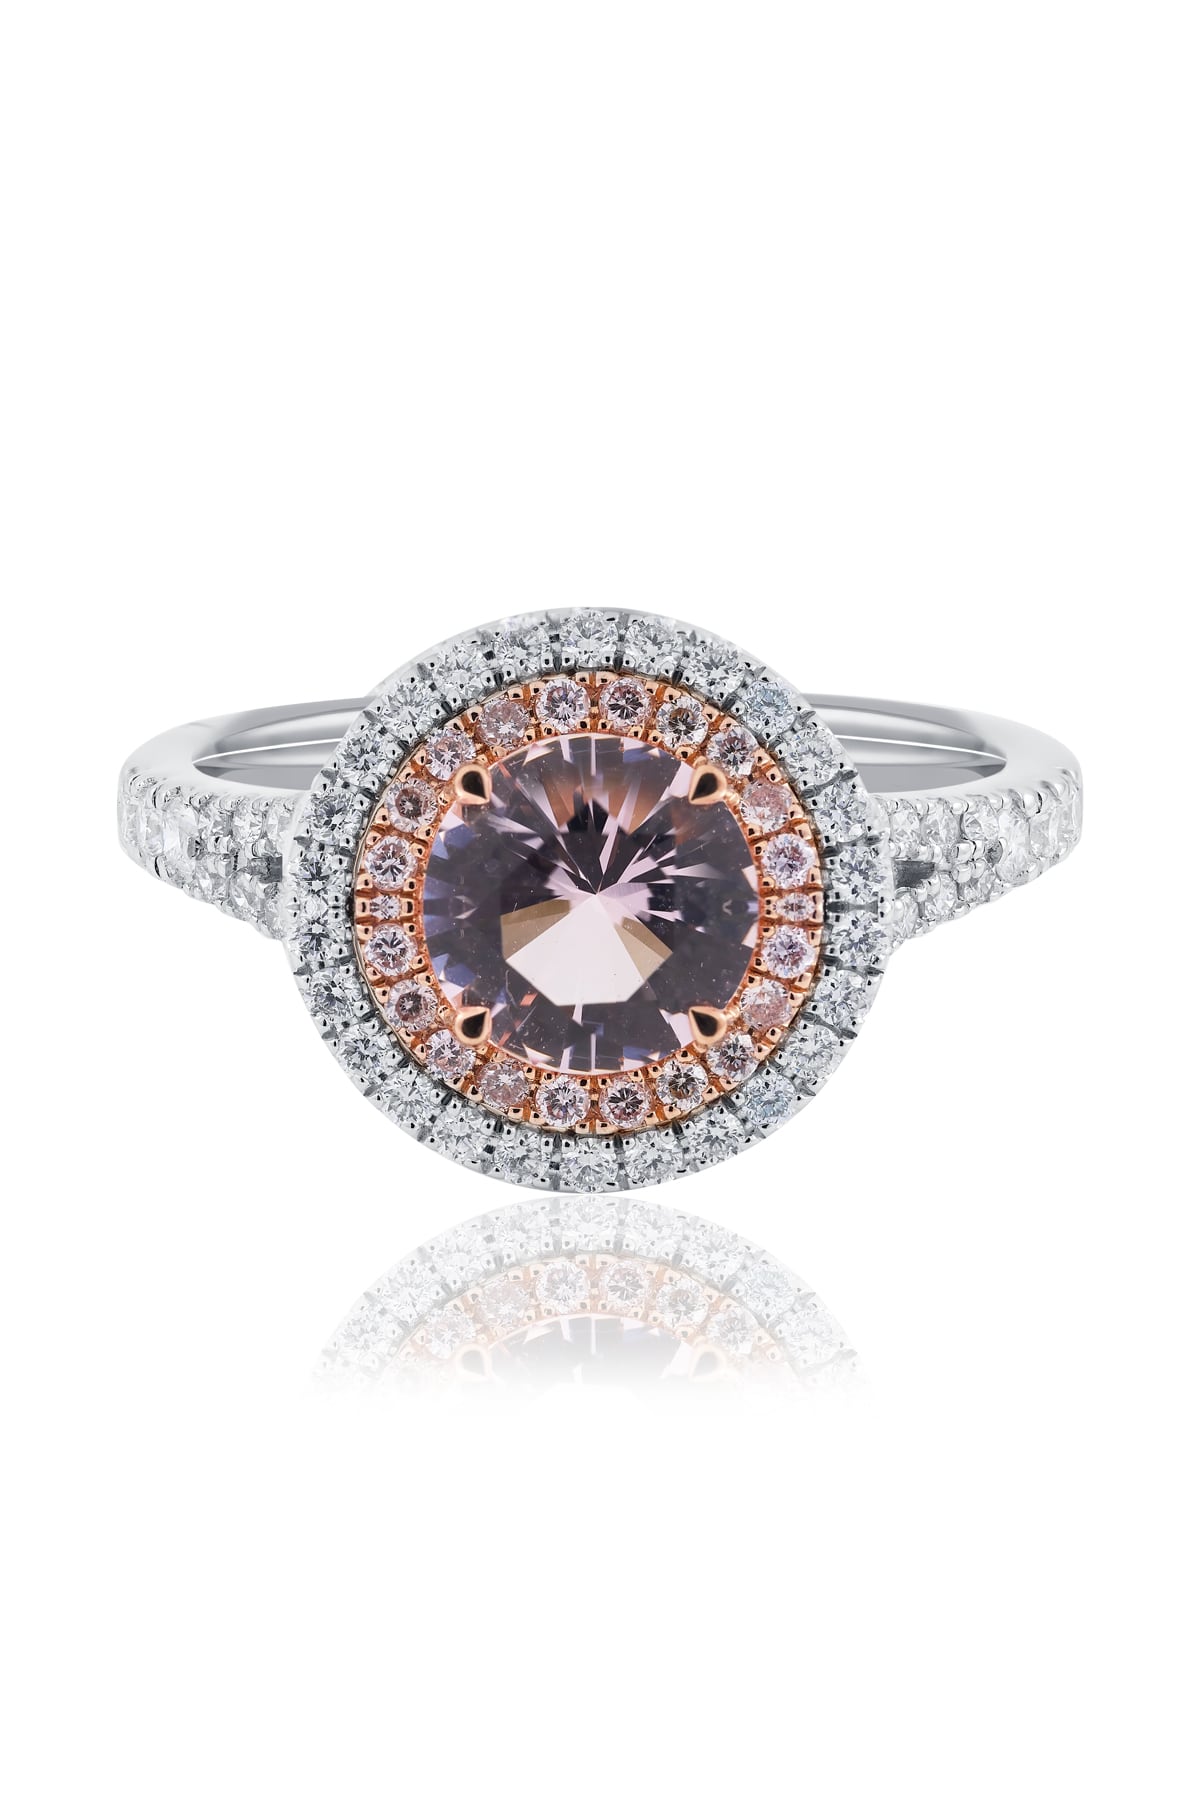 Pink Morganite & Diamond Double Halo Ring from LeGassick Jewellery Gold Coast.